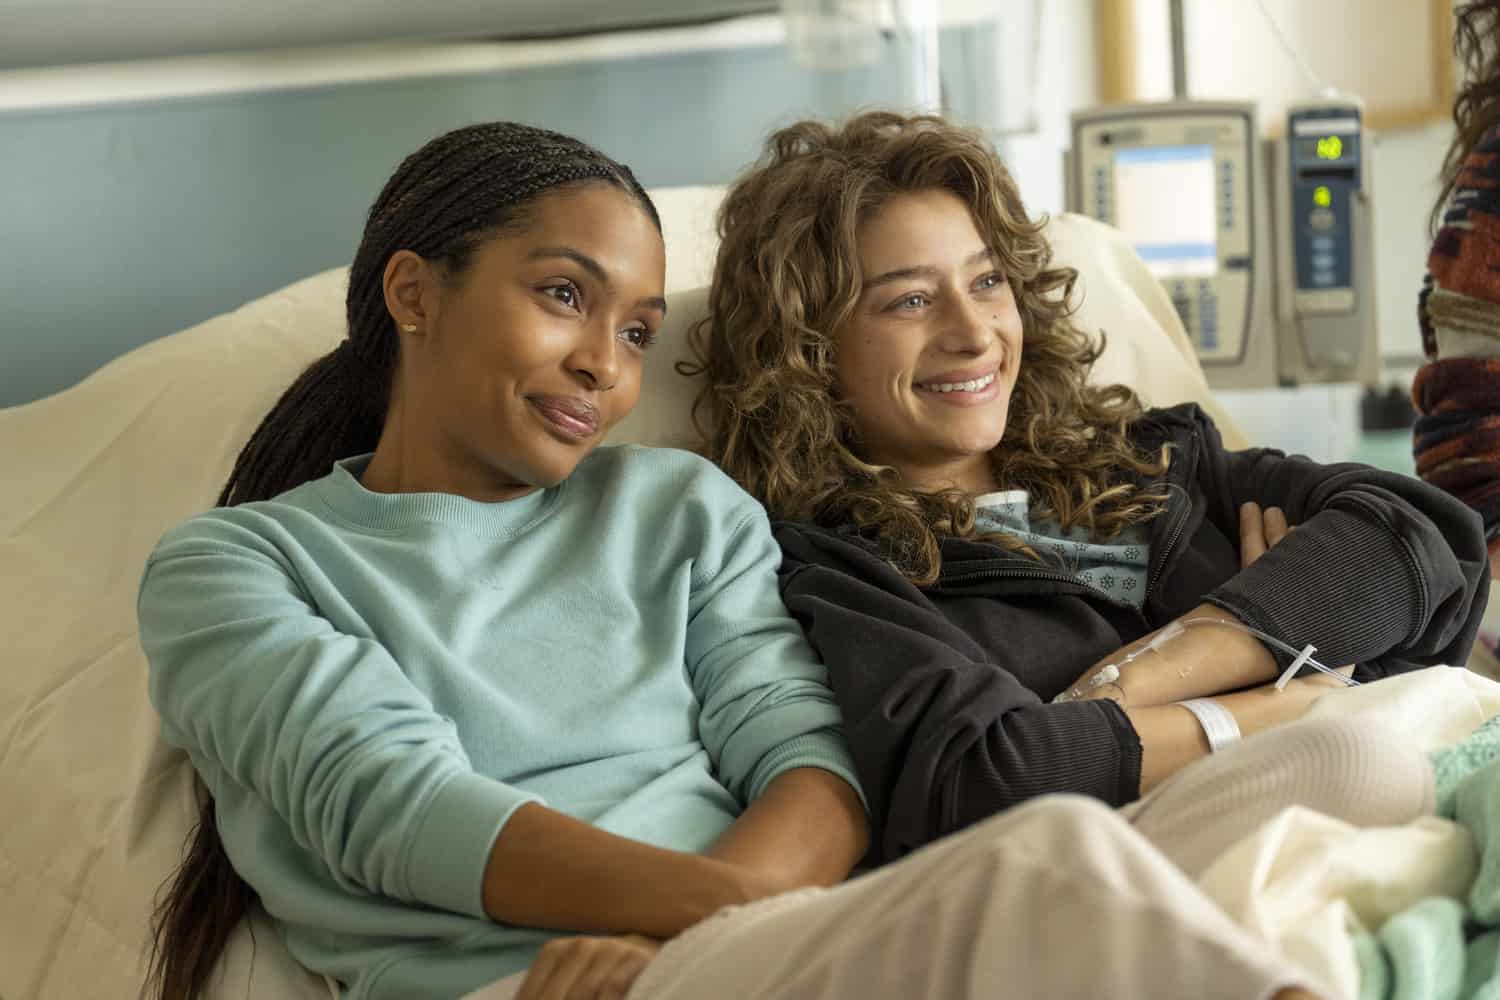 Two women sharing a hospital bed while smiling in this photo from Amazon Studios